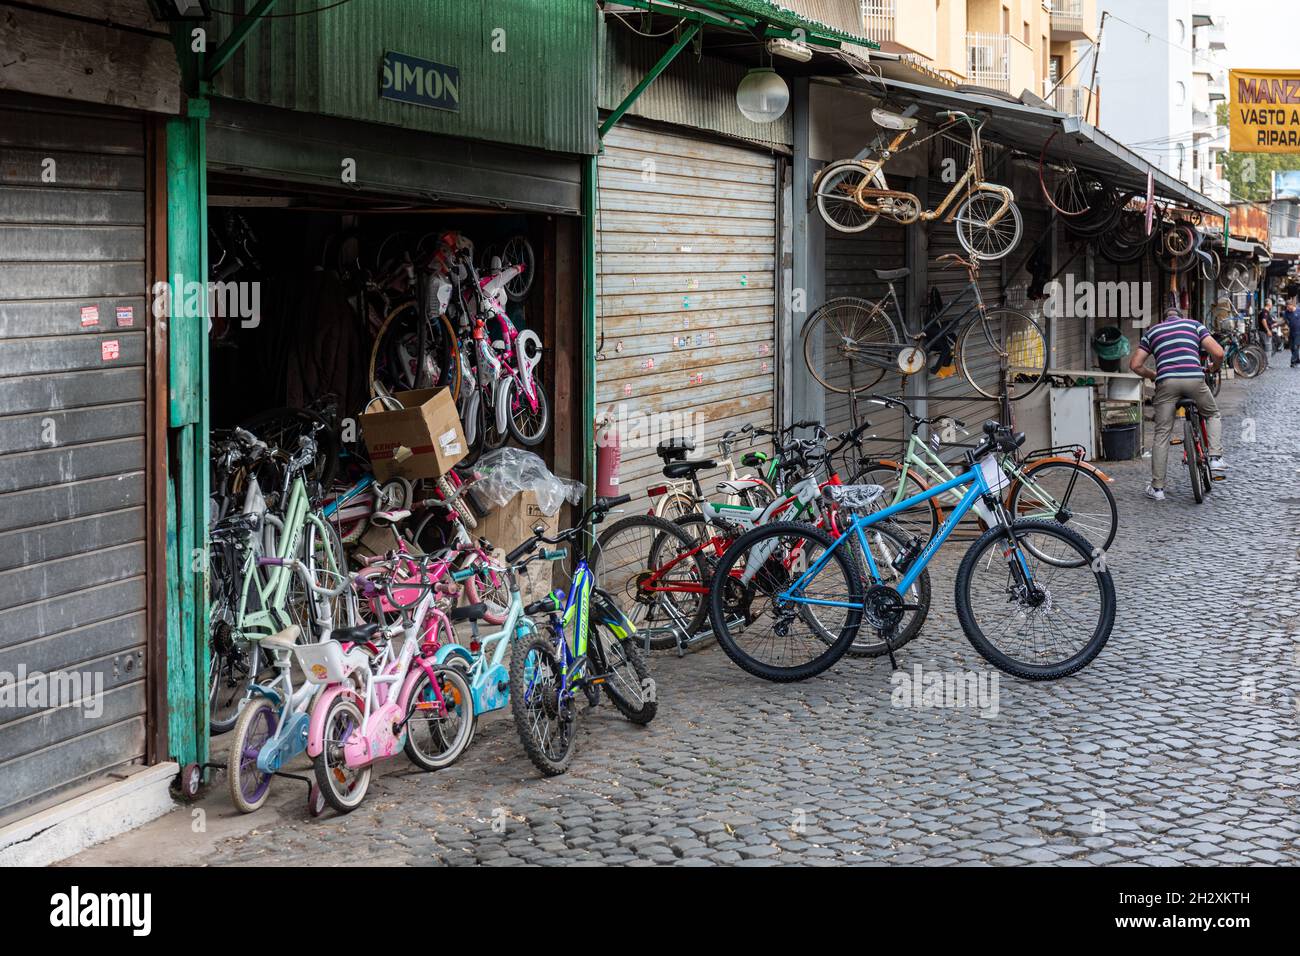 Used second-hand bicycles for sale at one of the Clivio Portuense garages in Trastevere district of Rome, Italy Stock Photo